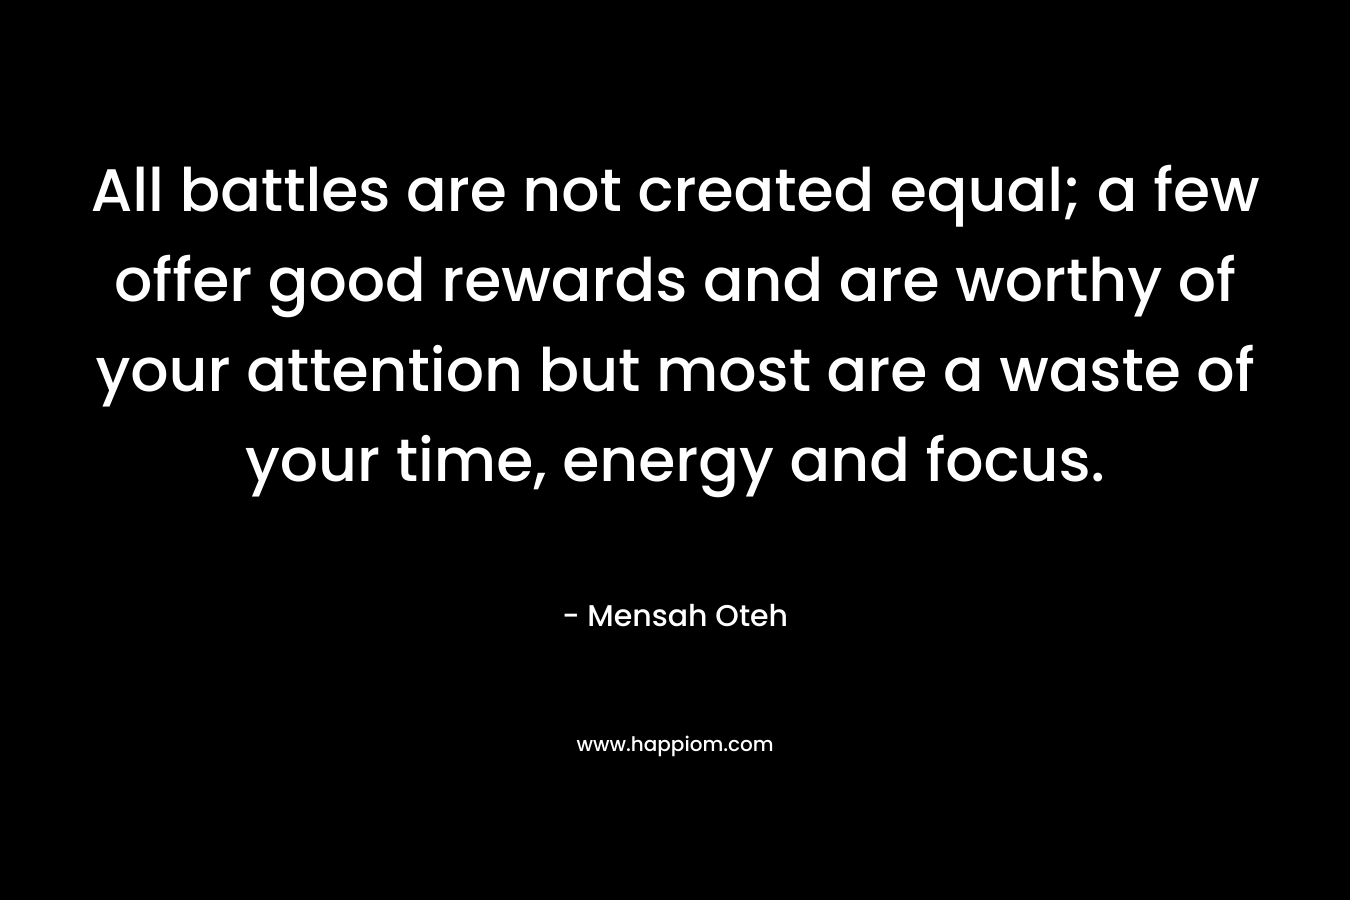 All battles are not created equal; a few offer good rewards and are worthy of your attention but most are a waste of your time, energy and focus.